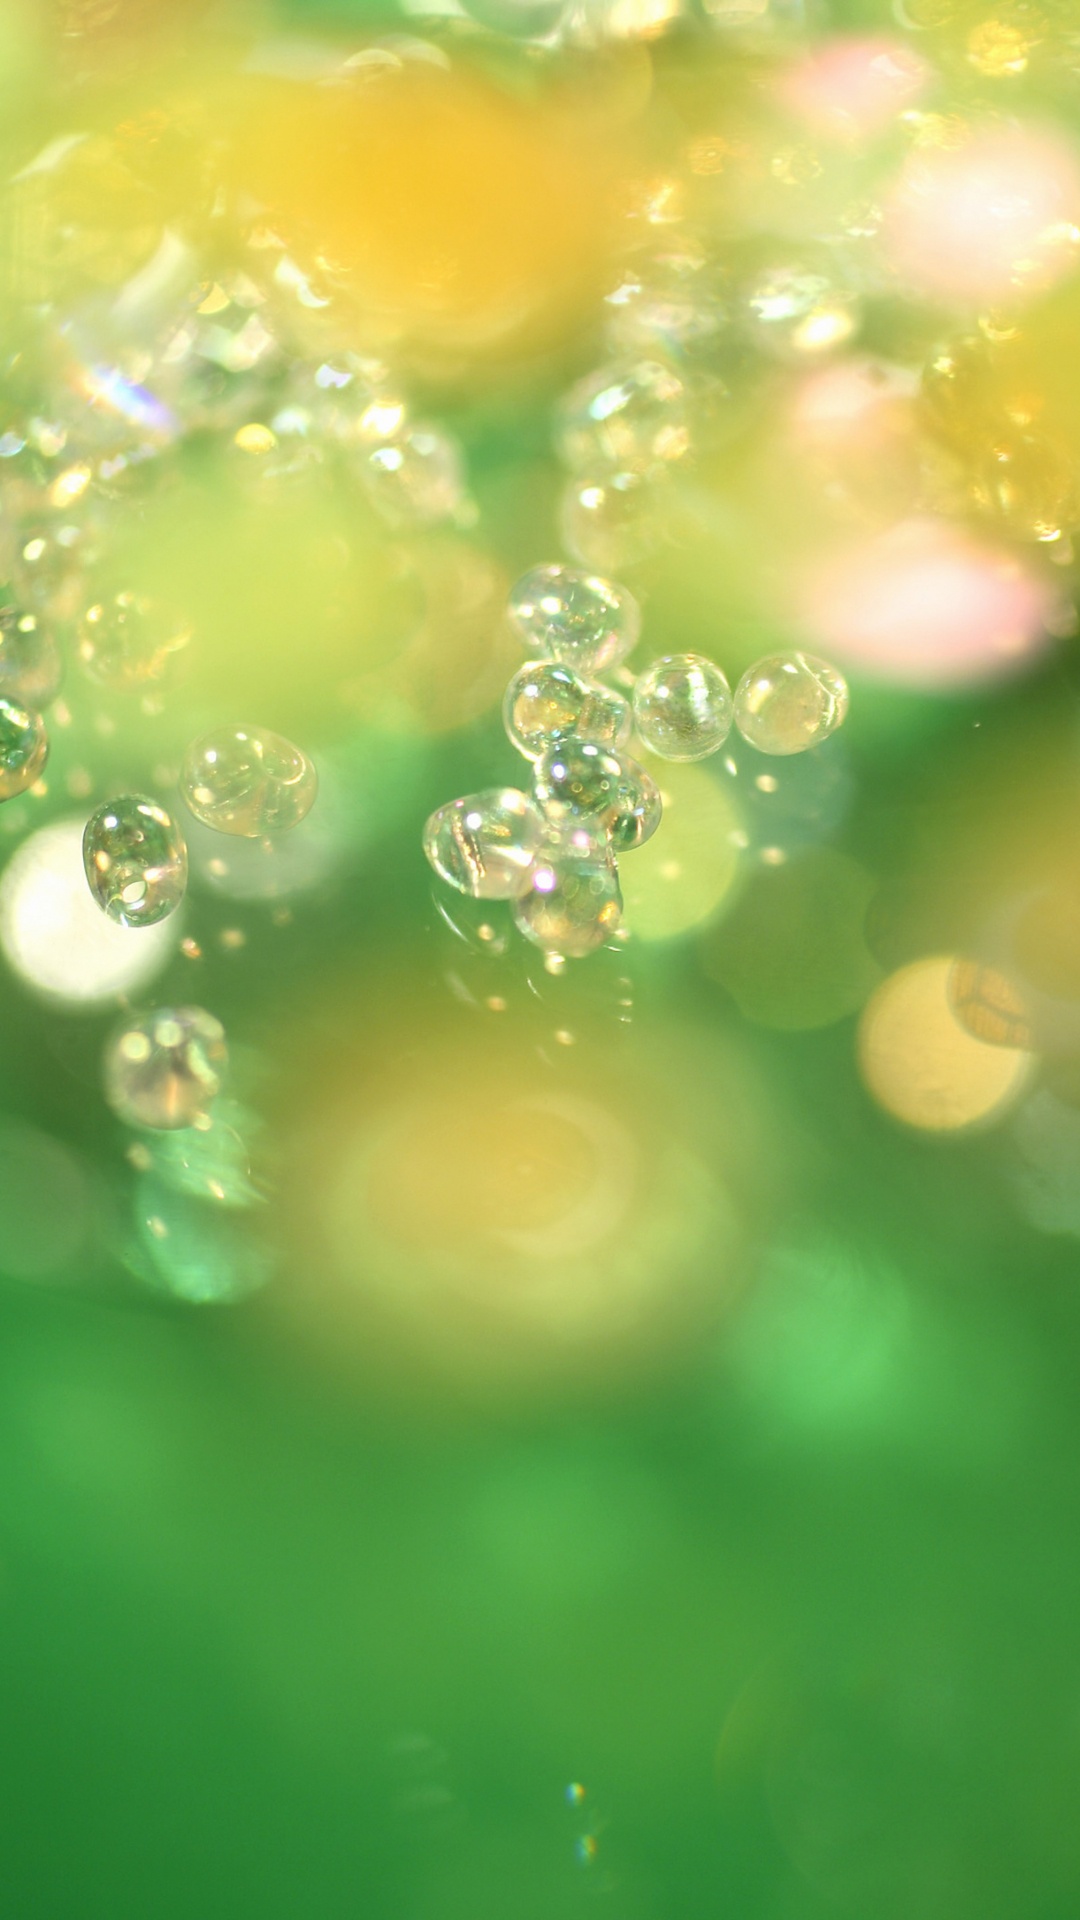 Water Droplets on Green Surface. Wallpaper in 1080x1920 Resolution